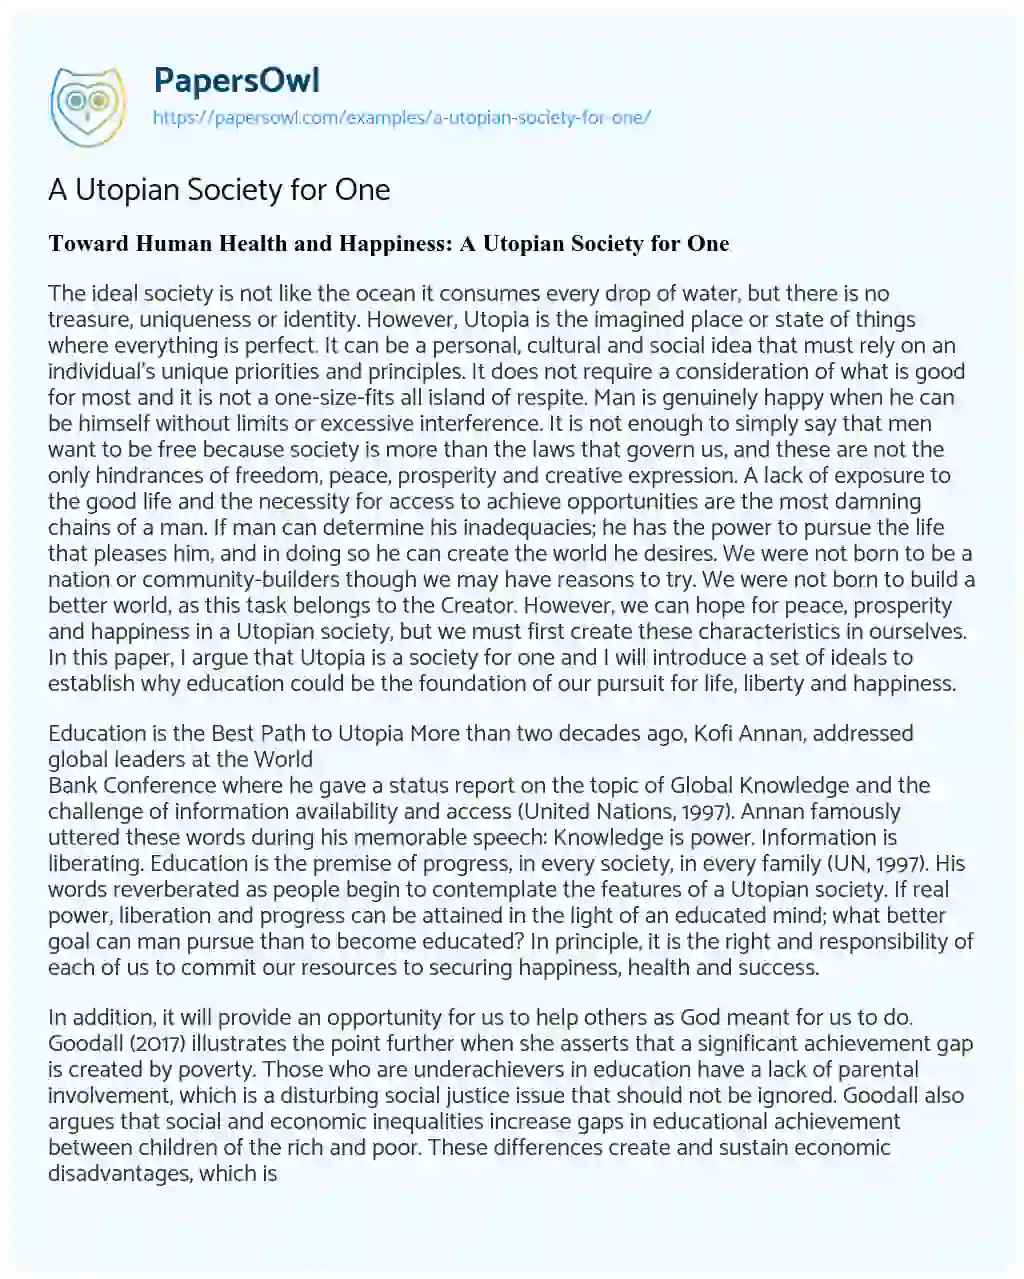 Essay on A Utopian Society for One